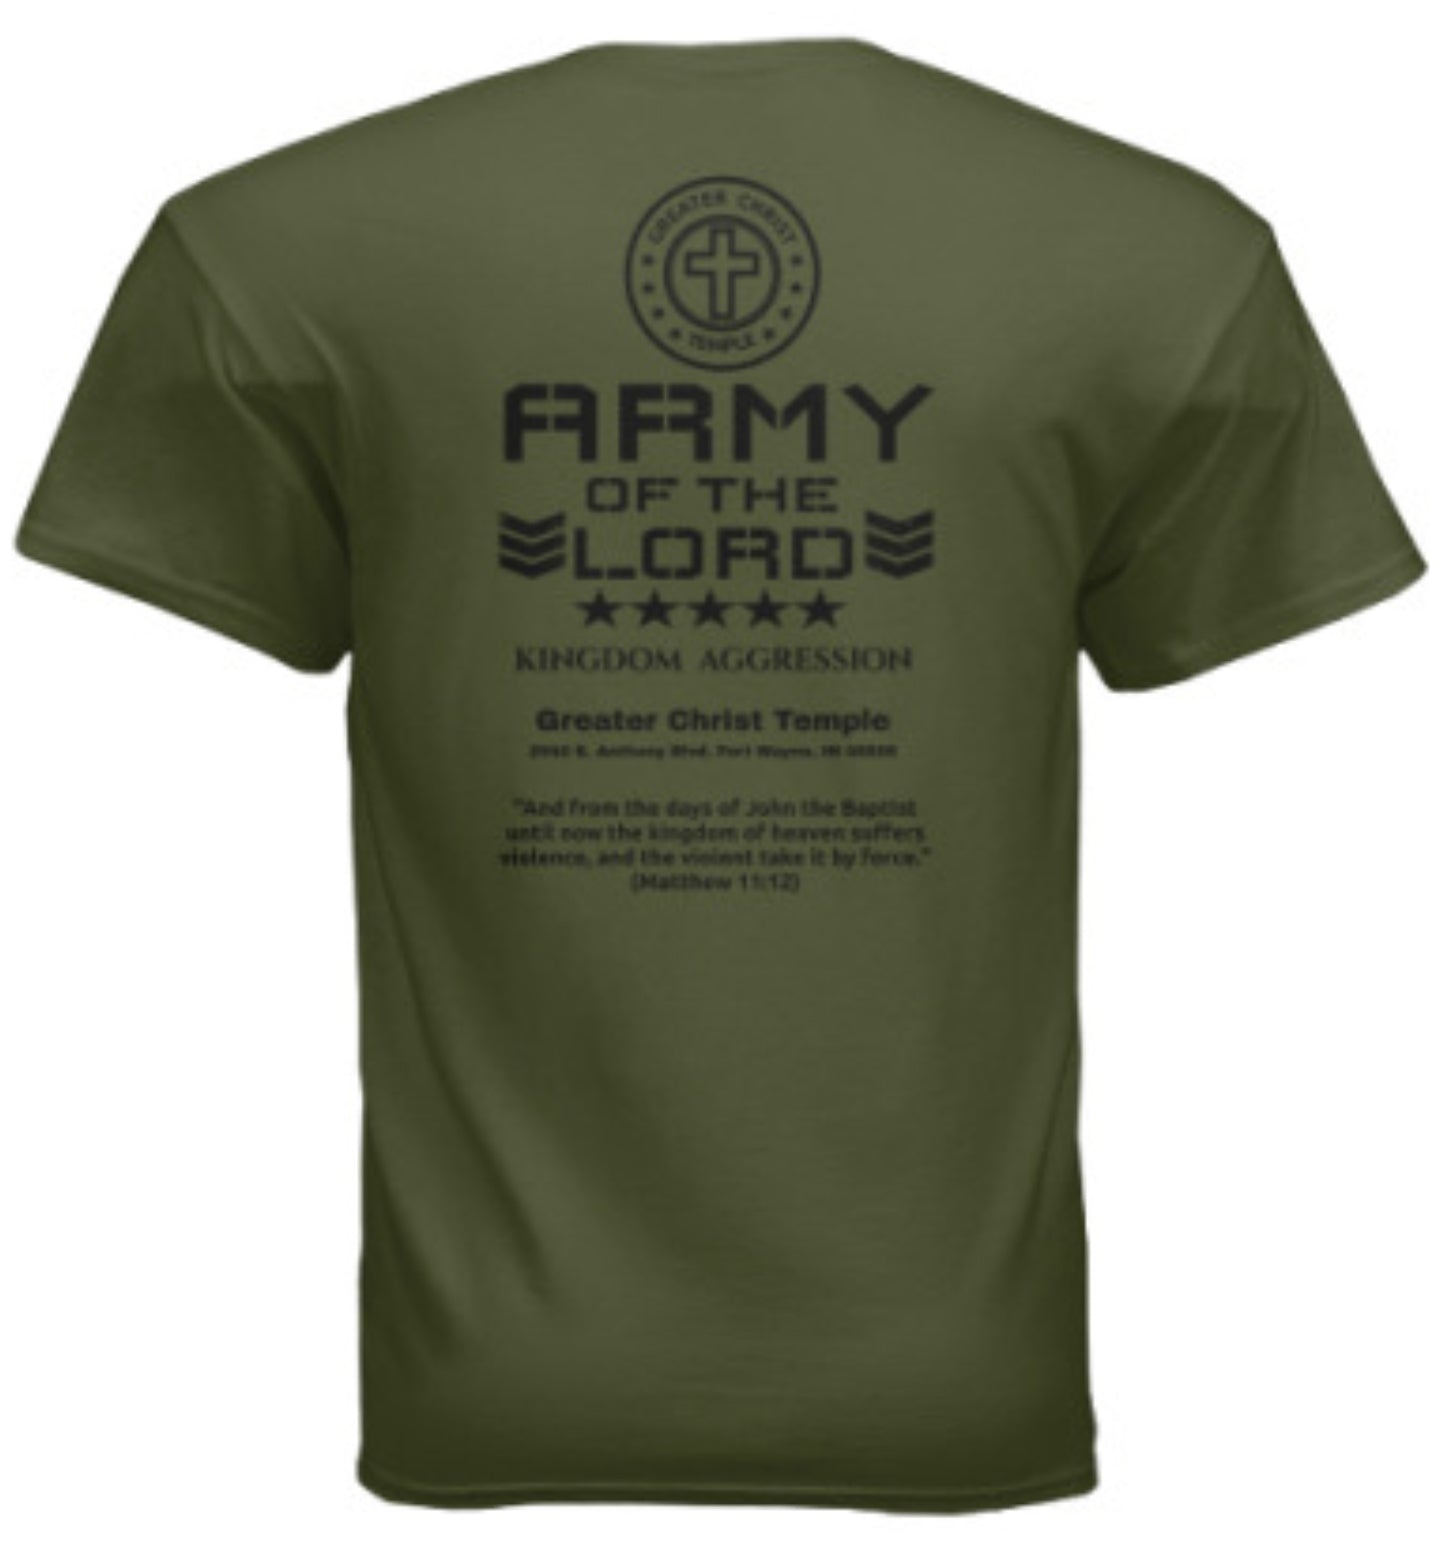 Army of the LORD - GreaterCTC (Green) tshirt